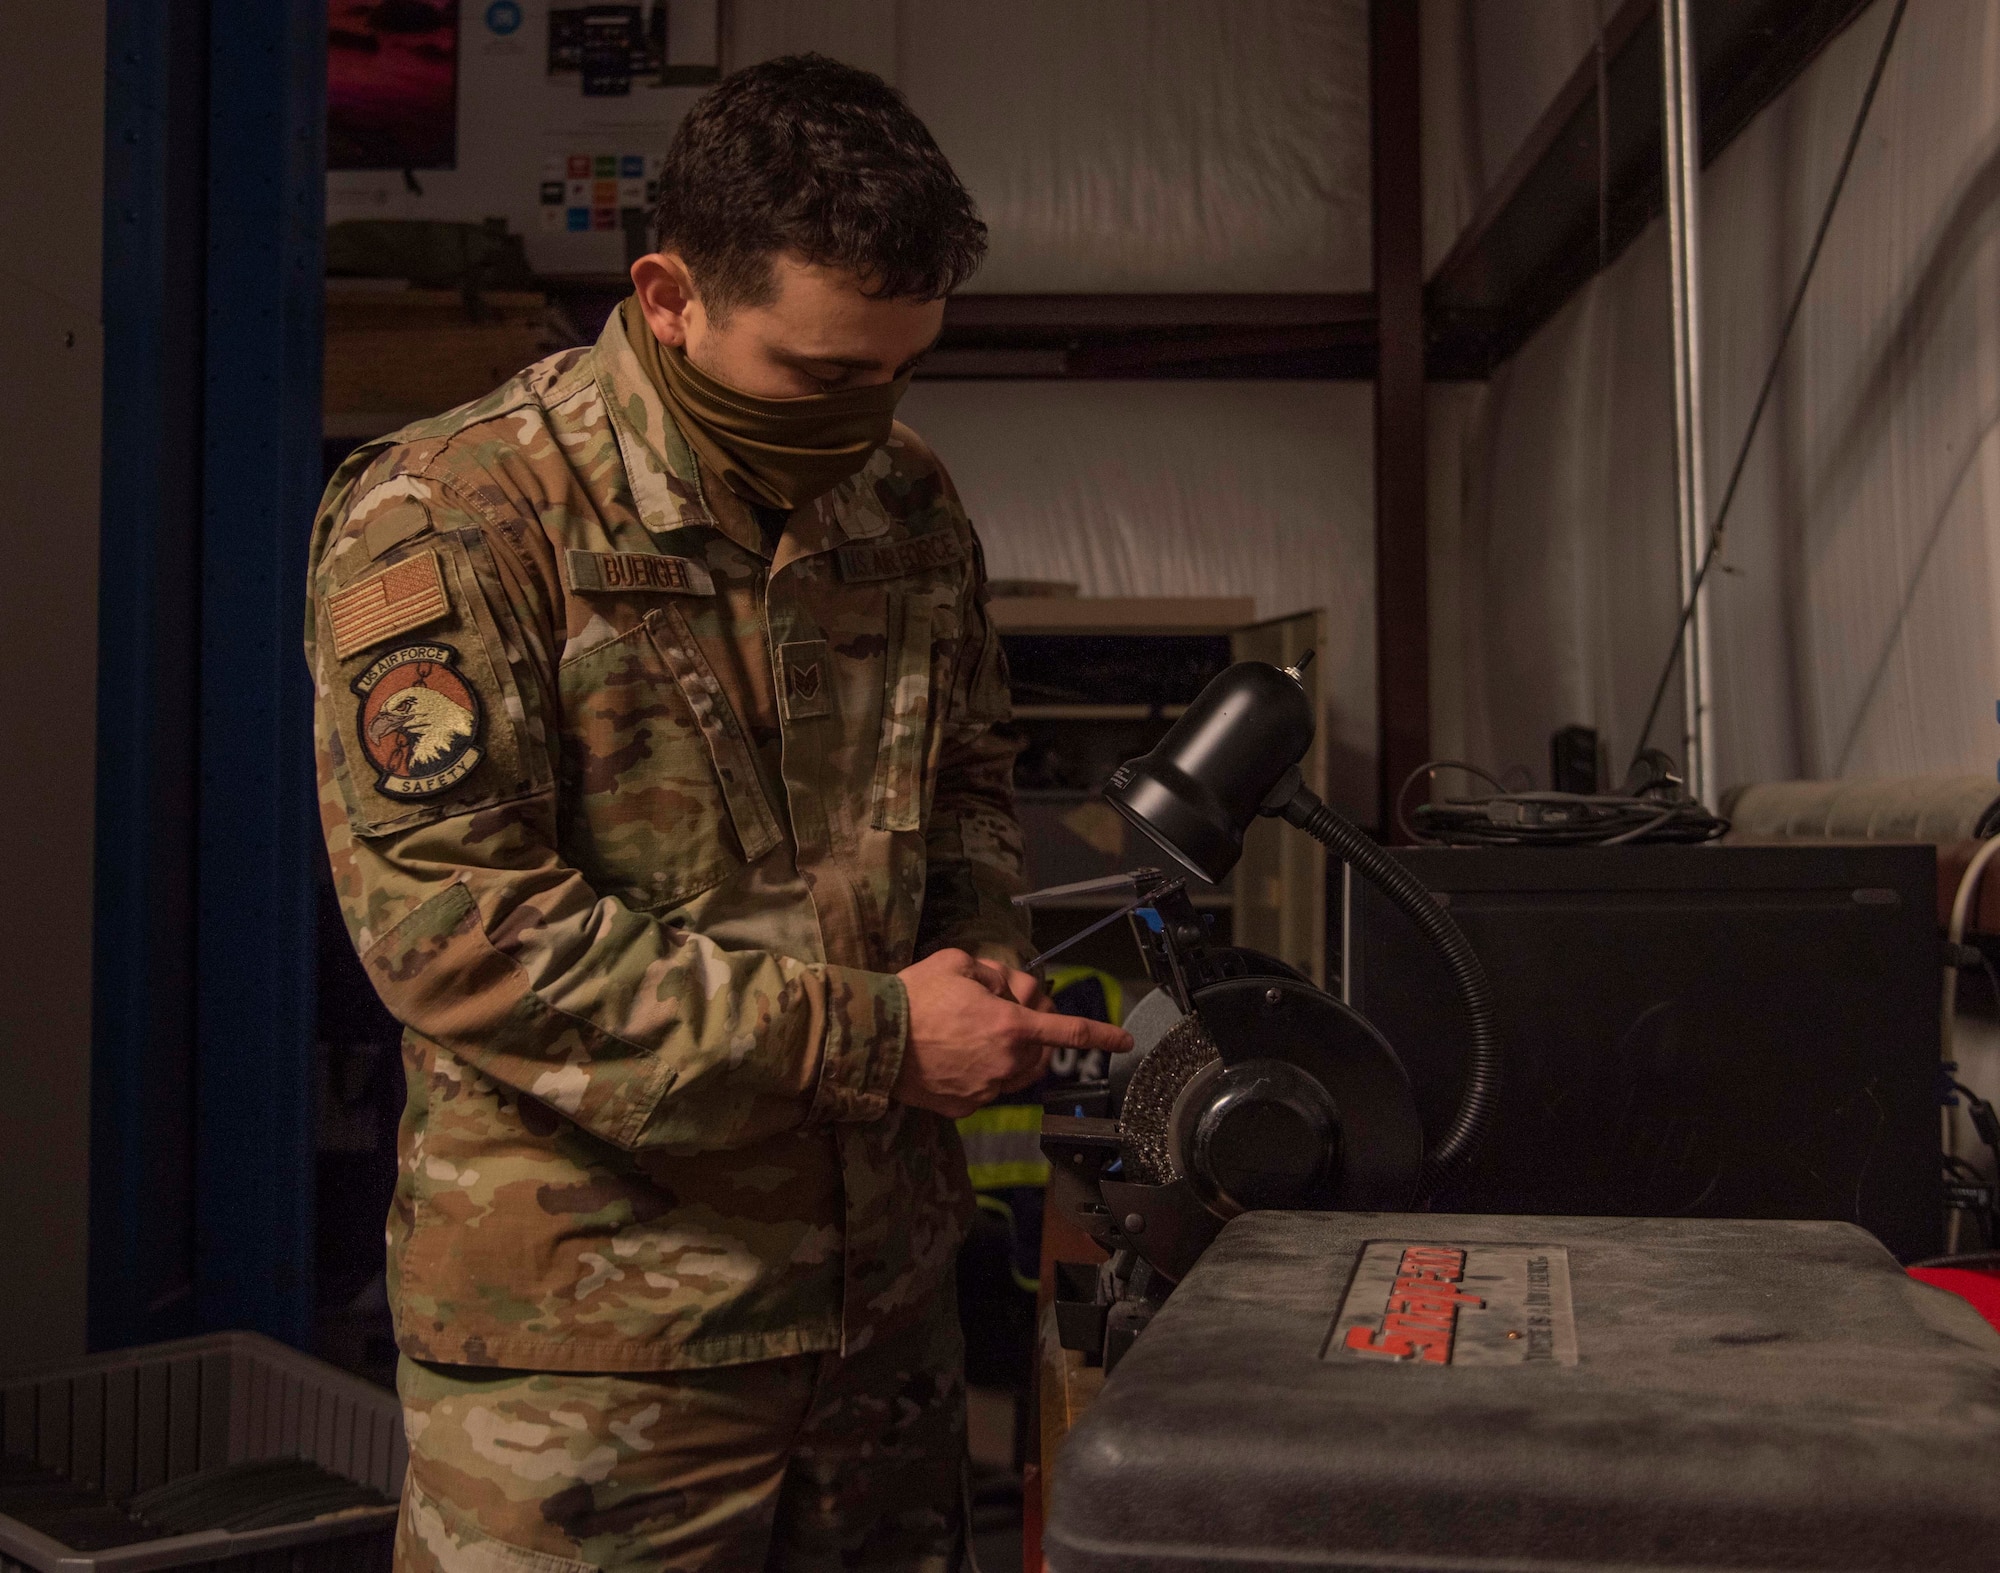 The 4th Fighter Wing Safety Office protects Team Seymour from hazards, mishaps.